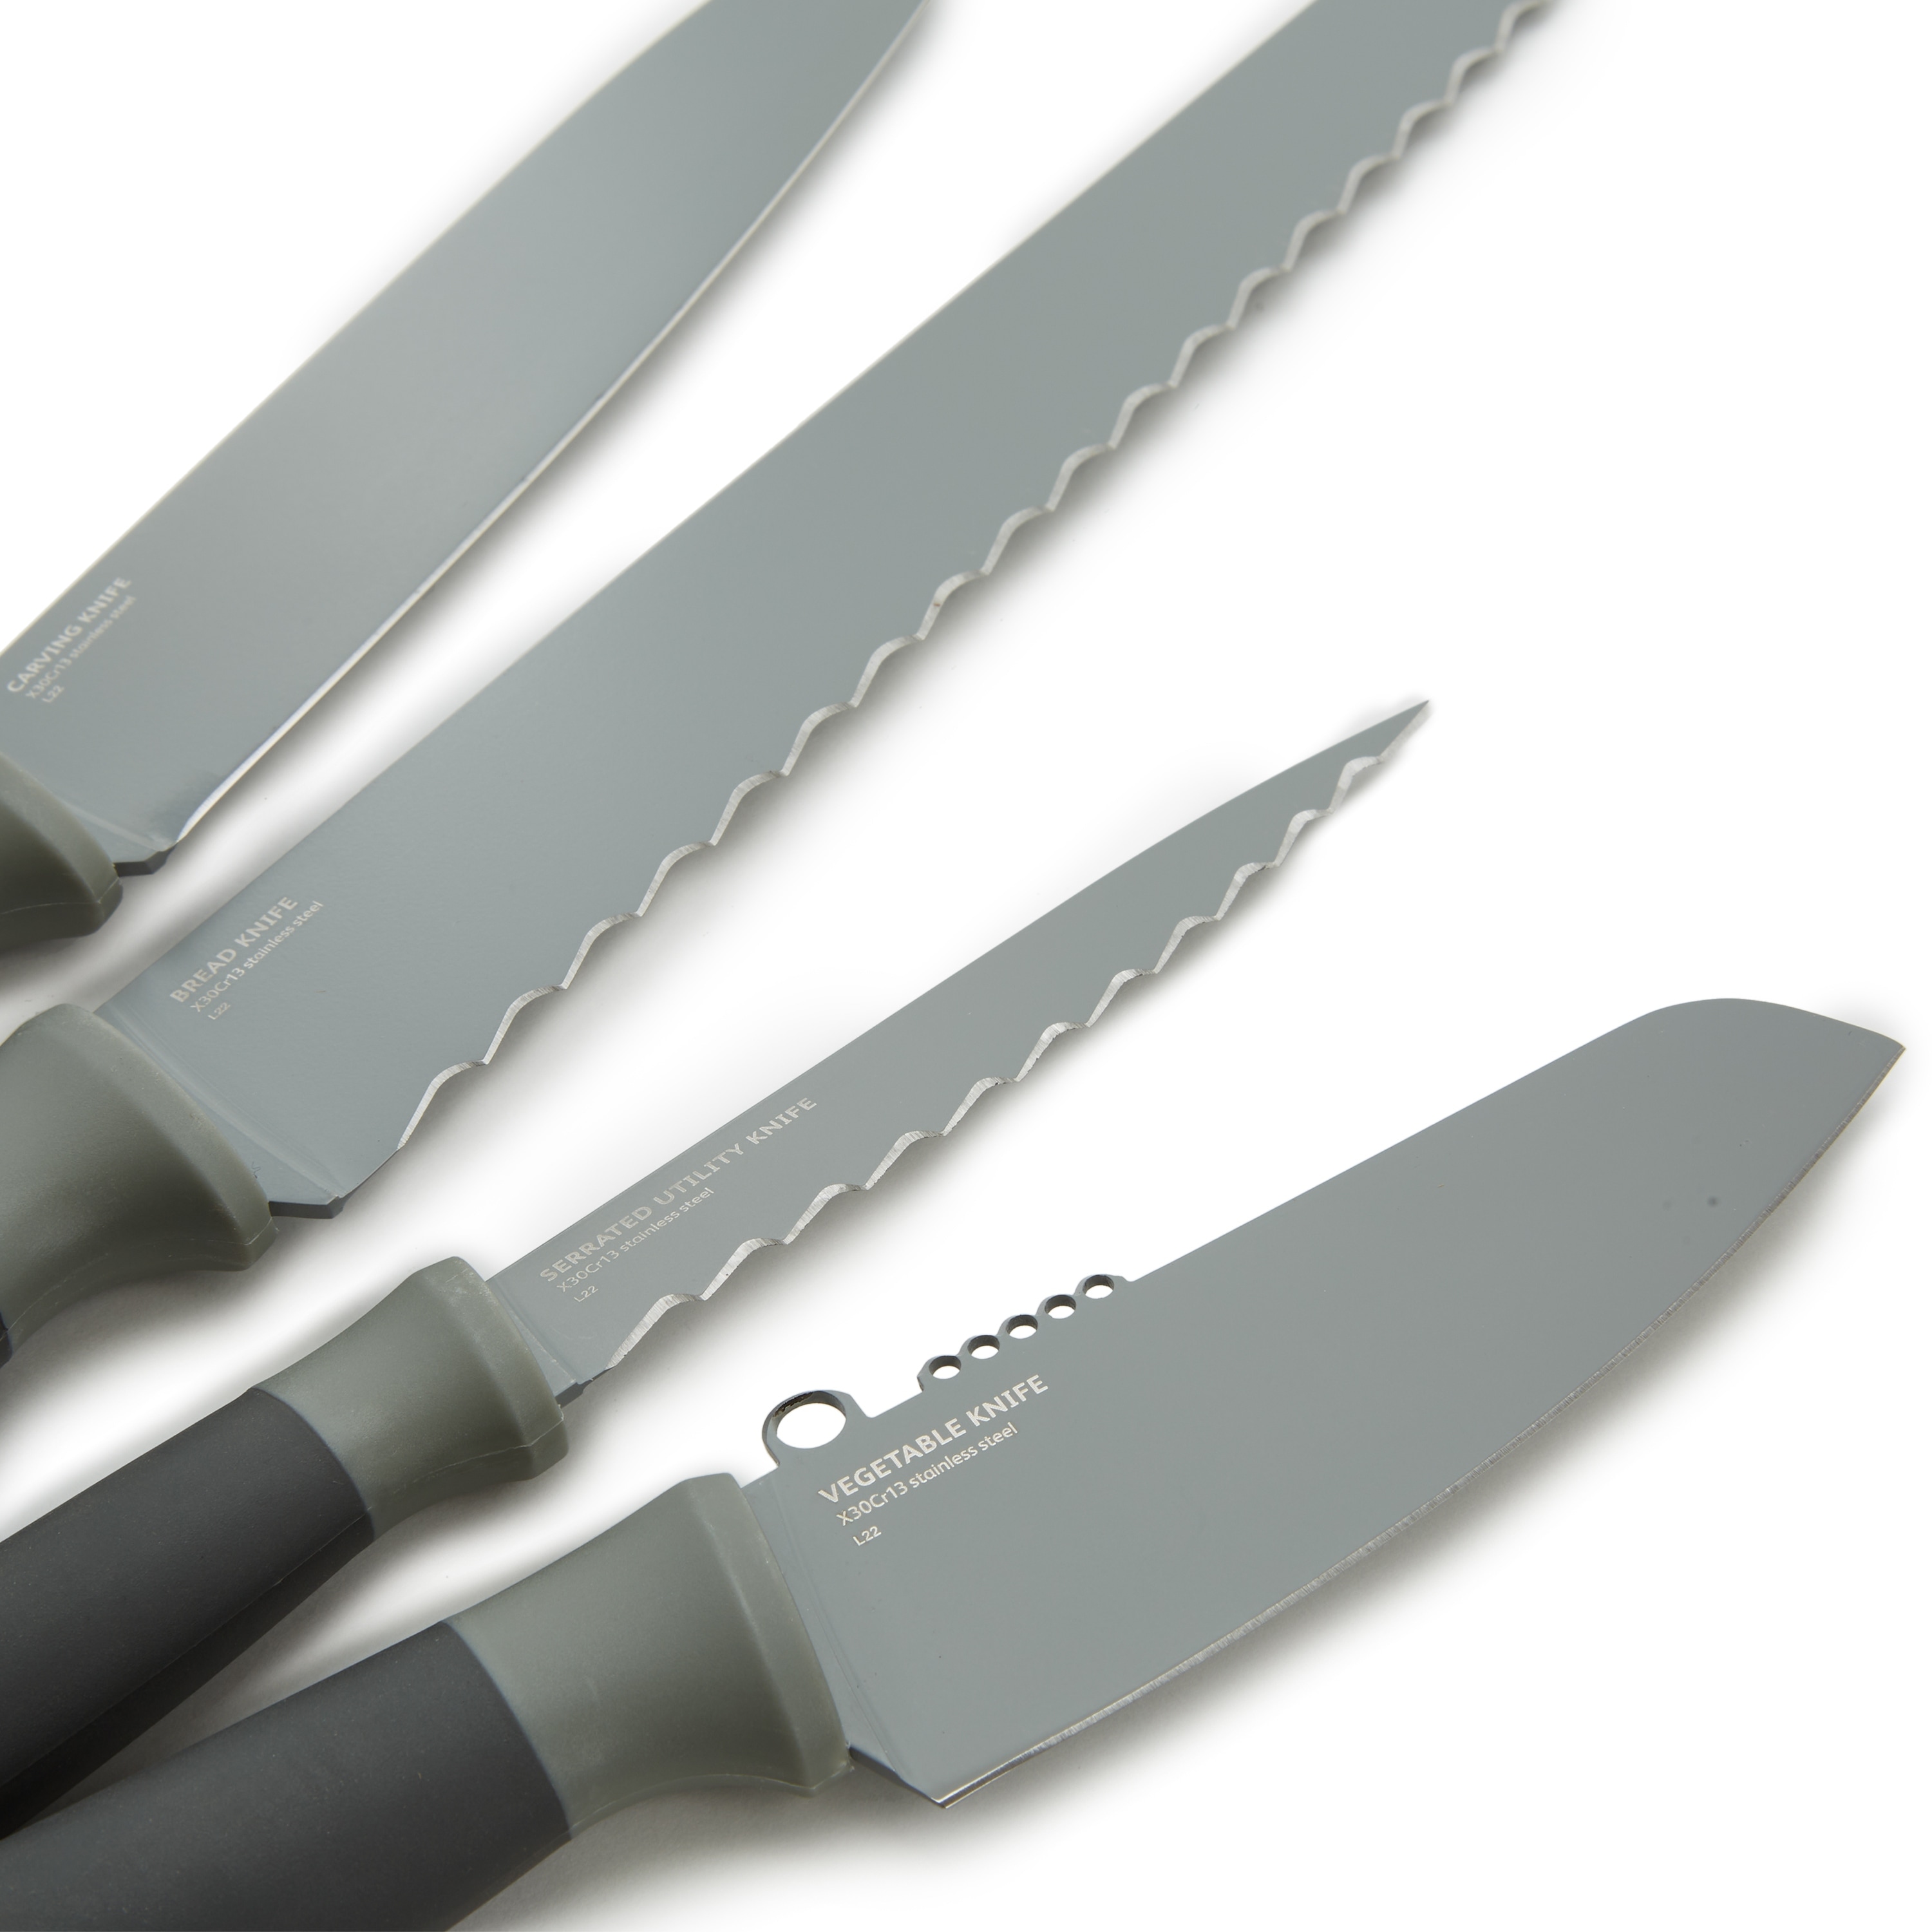 https://ak1.ostkcdn.com/images/products/is/images/direct/0f163c2aeeb4c1c96dea204f250e6c6ebd6d1814/BergHOFF-Balance-4Pc-Nonstick-Knife-Set%2C-Recycled-Material%2C-Protective-Sleeve-Included.jpg